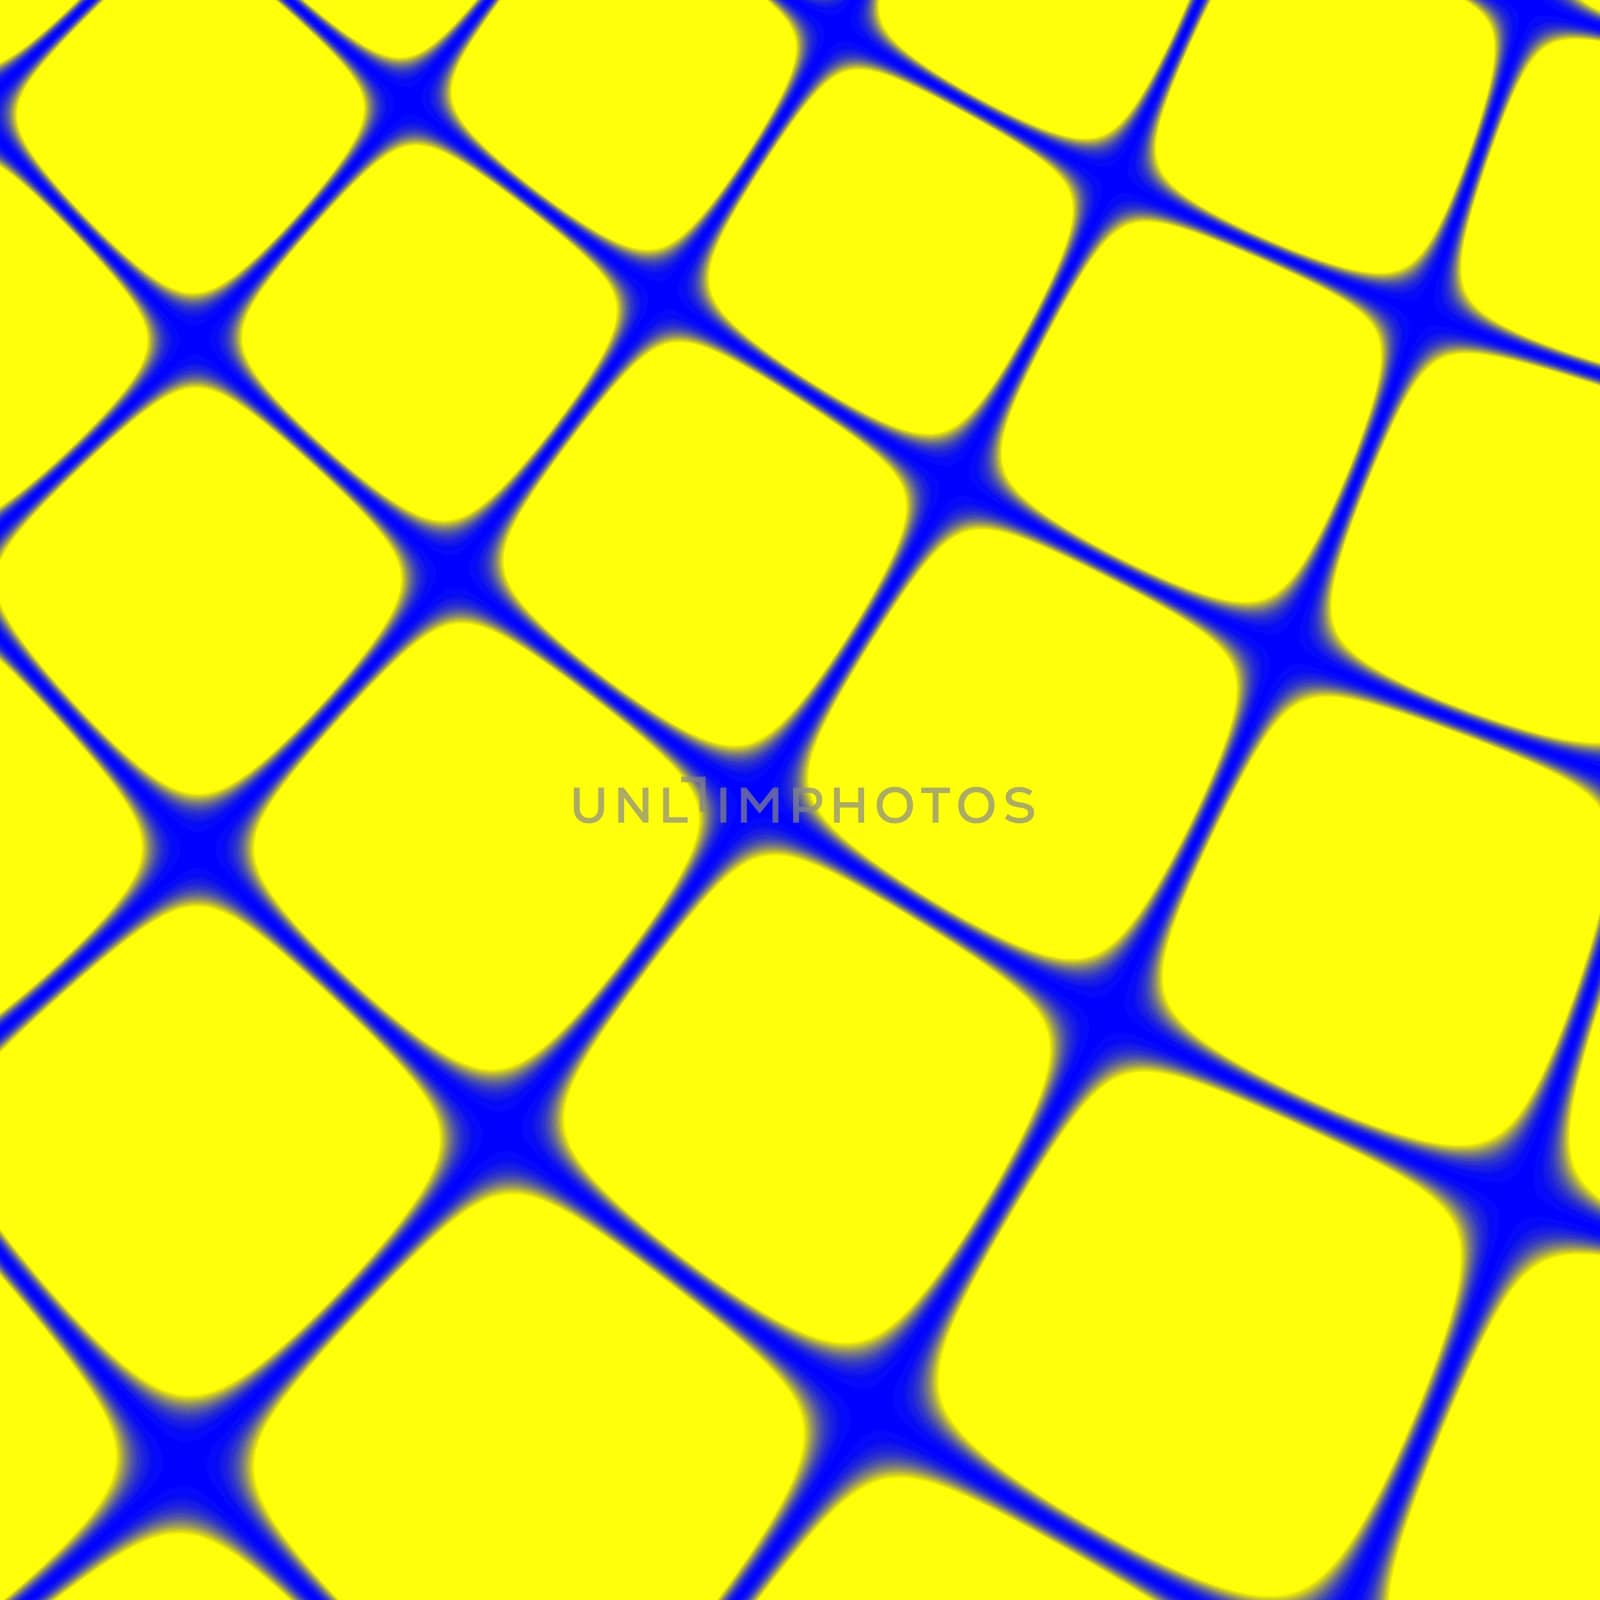 Abstract blue and yellow fractal background, grid theme. Can be easily converted to any other color set.